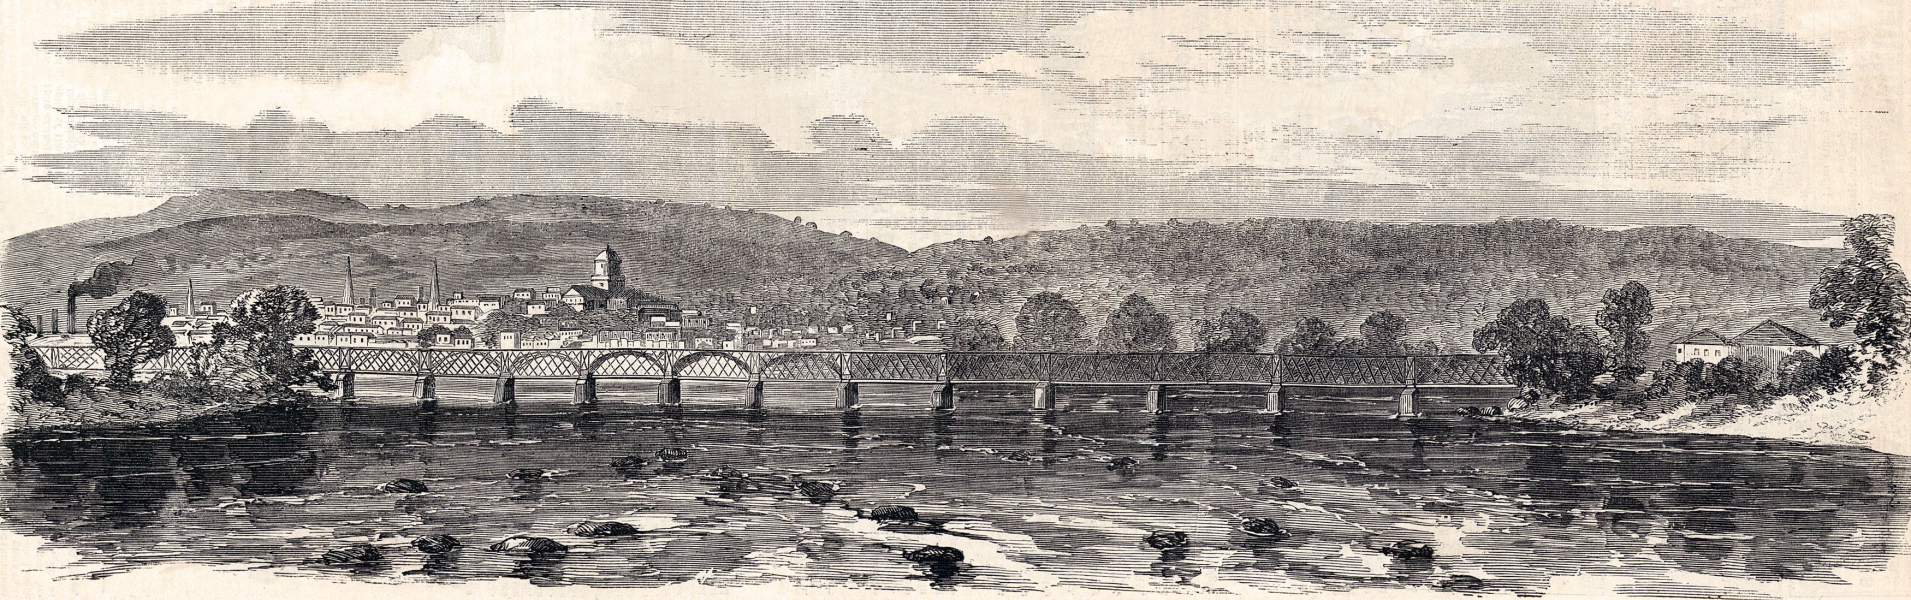 Harrisburg, Pennsylvania, July 1863, artist's impression, zoomable image